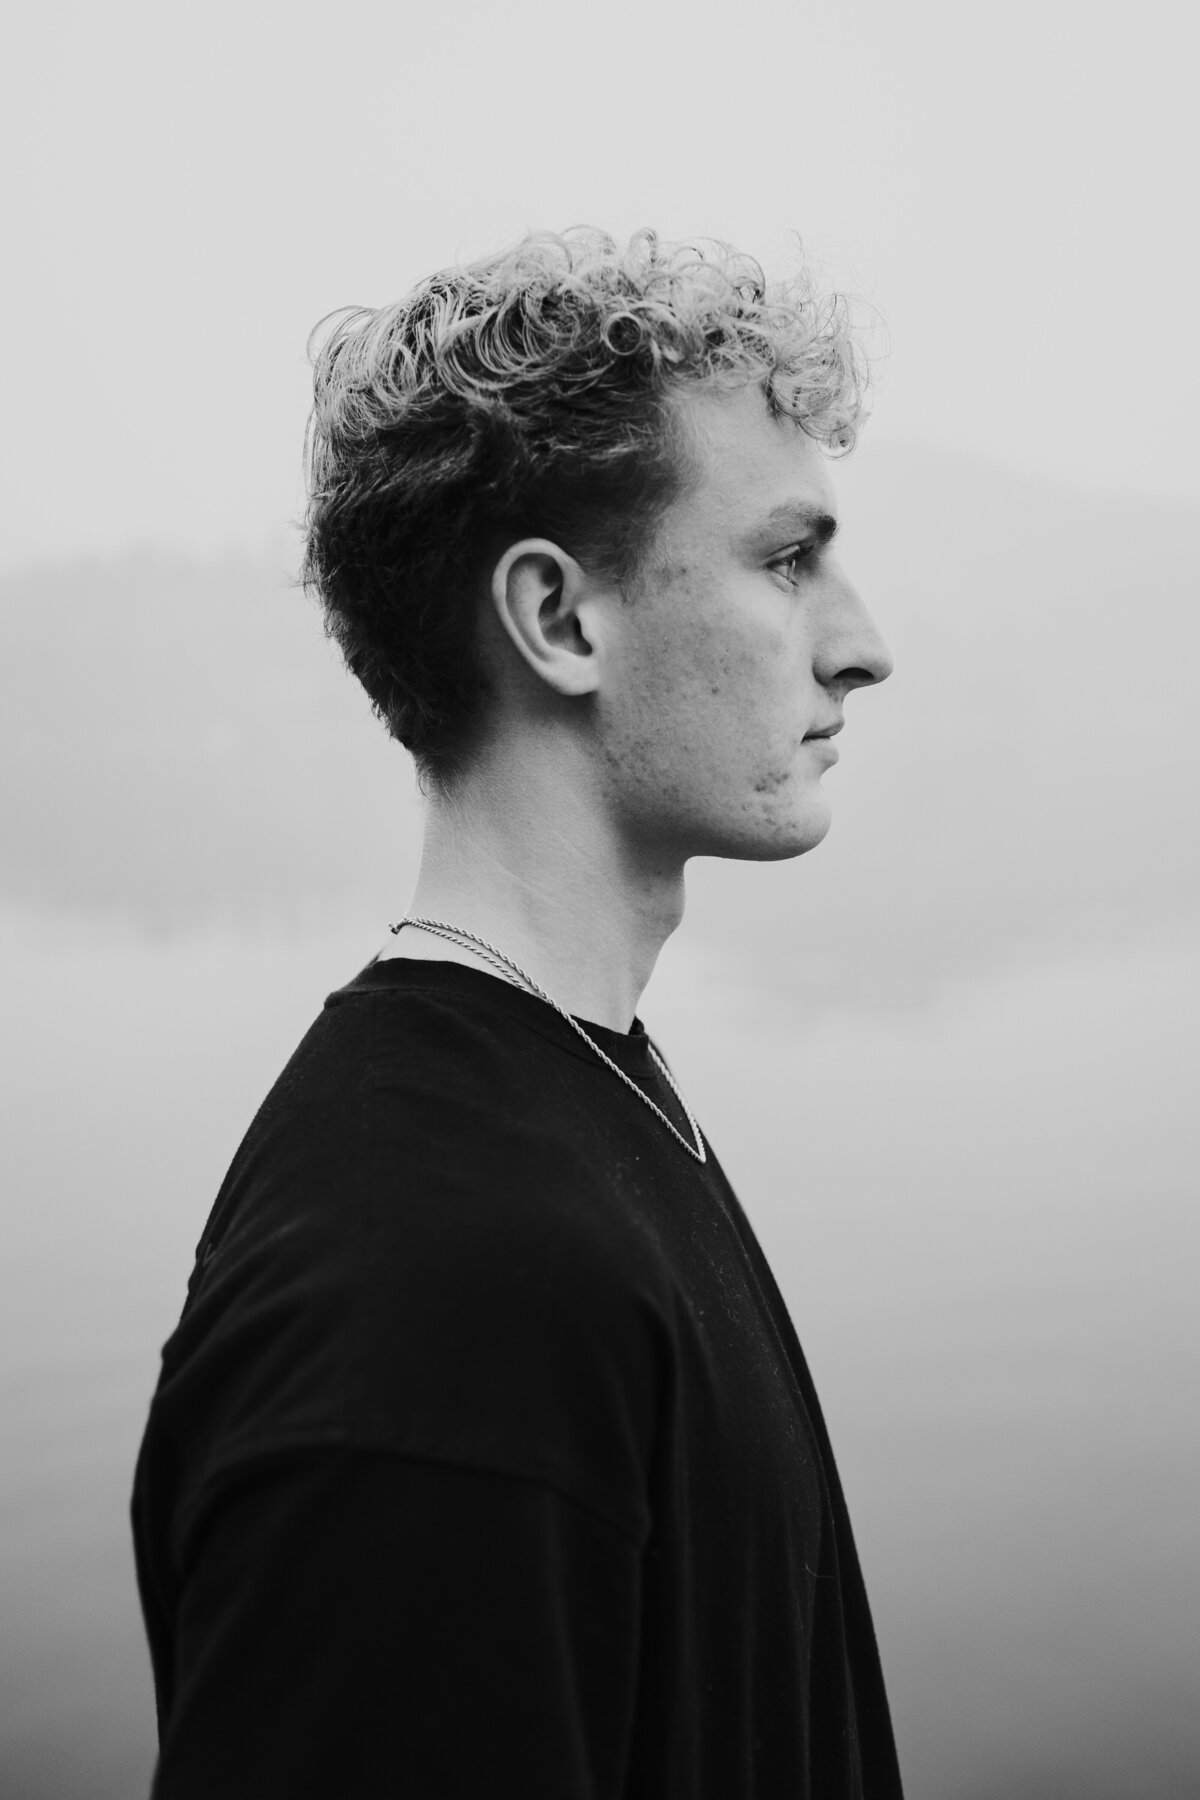 Black and white side profile of young man with smoky background.